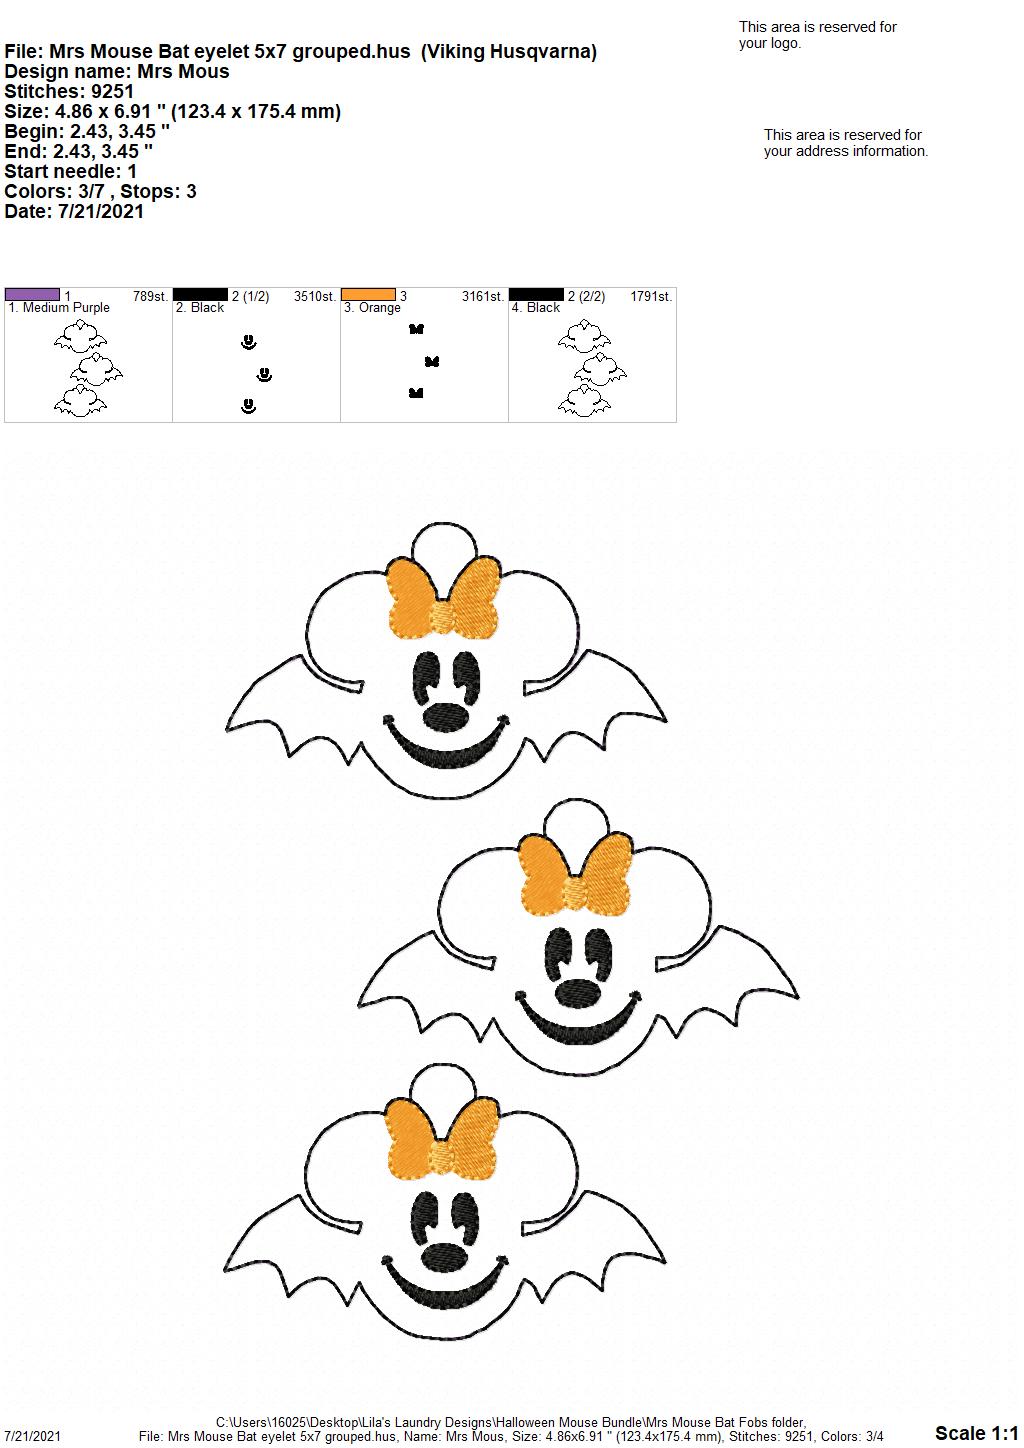 Mrs. Mouse Bat Fobs - DIGITAL Embroidery DESIGN